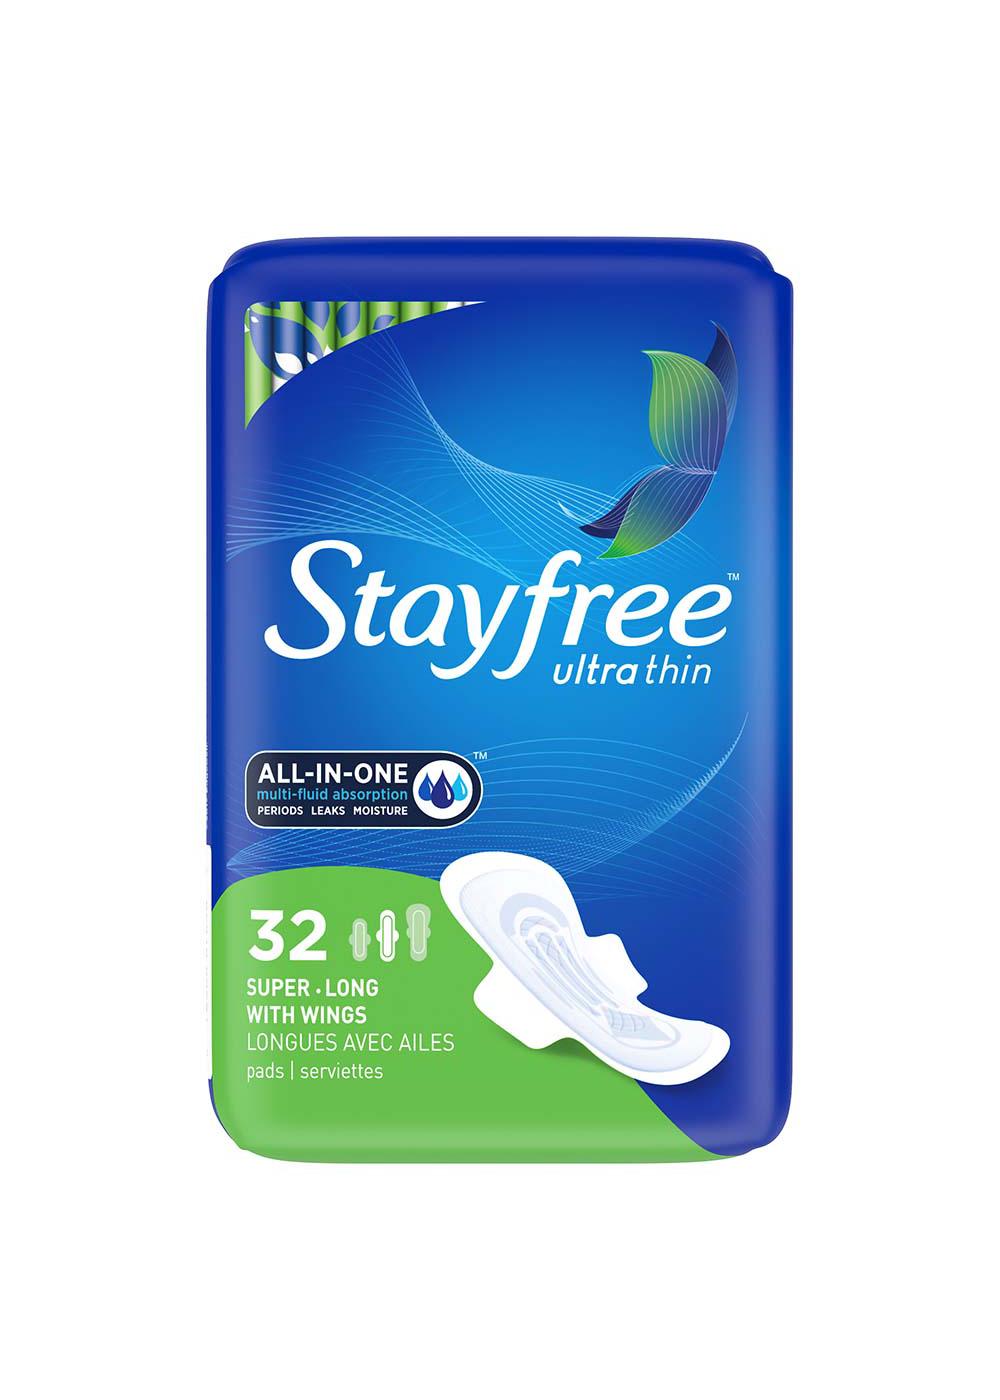 Stayfree Ultra Thin Super Long Pads with Wings; image 1 of 4